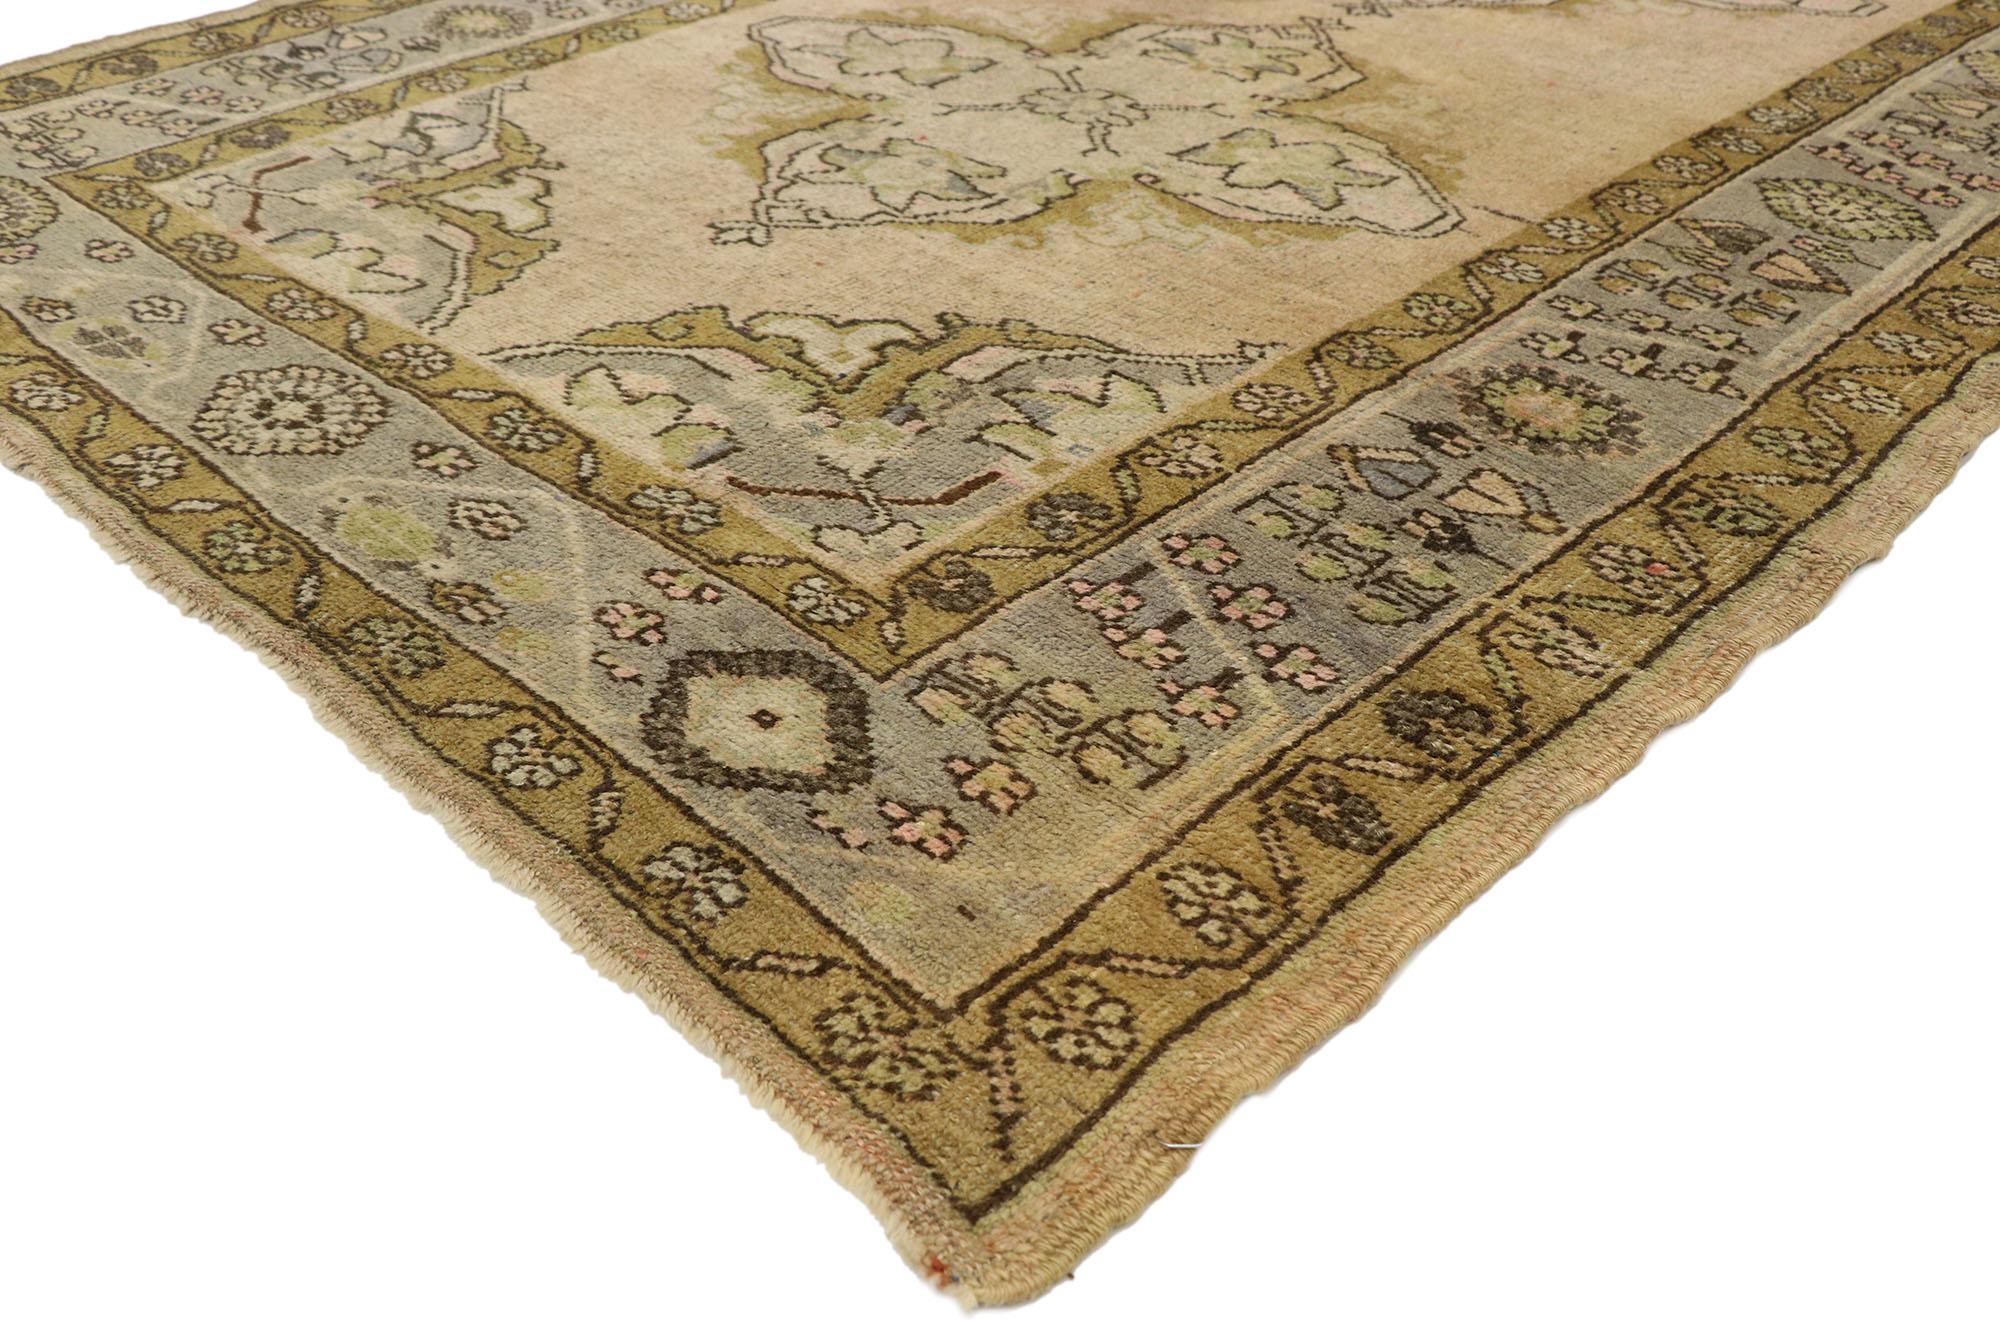 76862, Vintage Turkish Oushak Gallery Rug in Soft Colors, Wide Hallway Runner 05'02 x 10'09. Emanating grace and sophistication, this hand knotted wool vintage Turkish Oushak gallery rug provides an elegant and genteel design aesthetic with soft